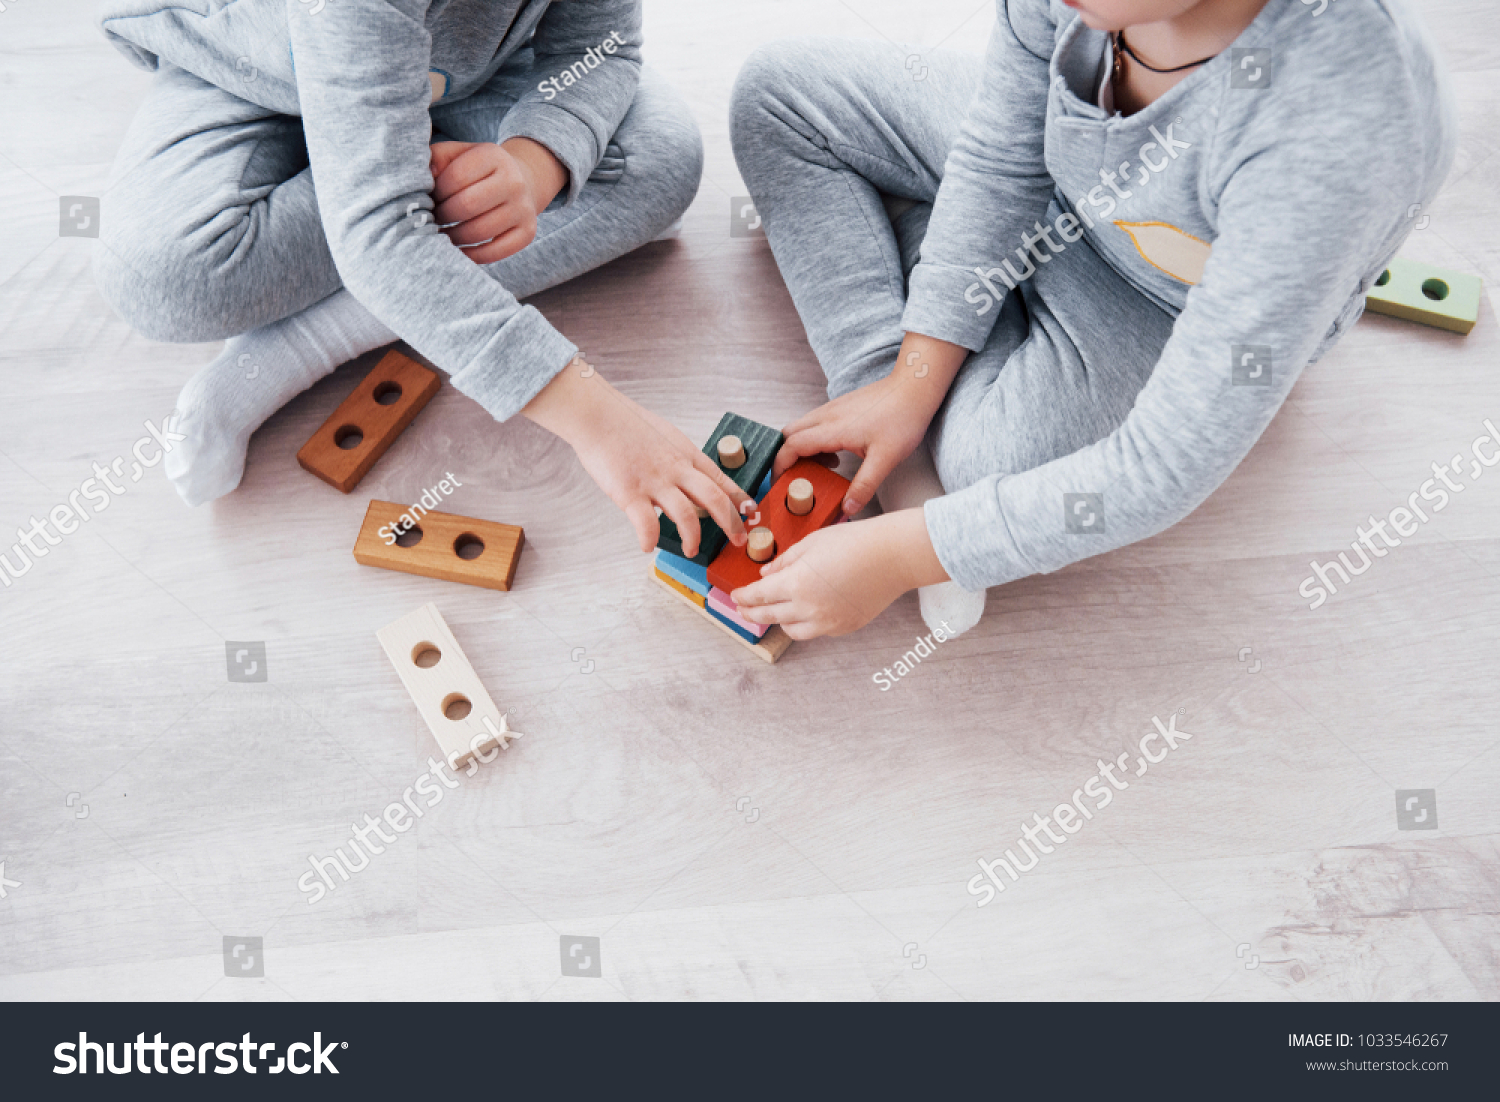 Children play with a toy designer on the floor of the children's room. Two kids playing with colorful blocks. Kindergarten educational games. #1033546267